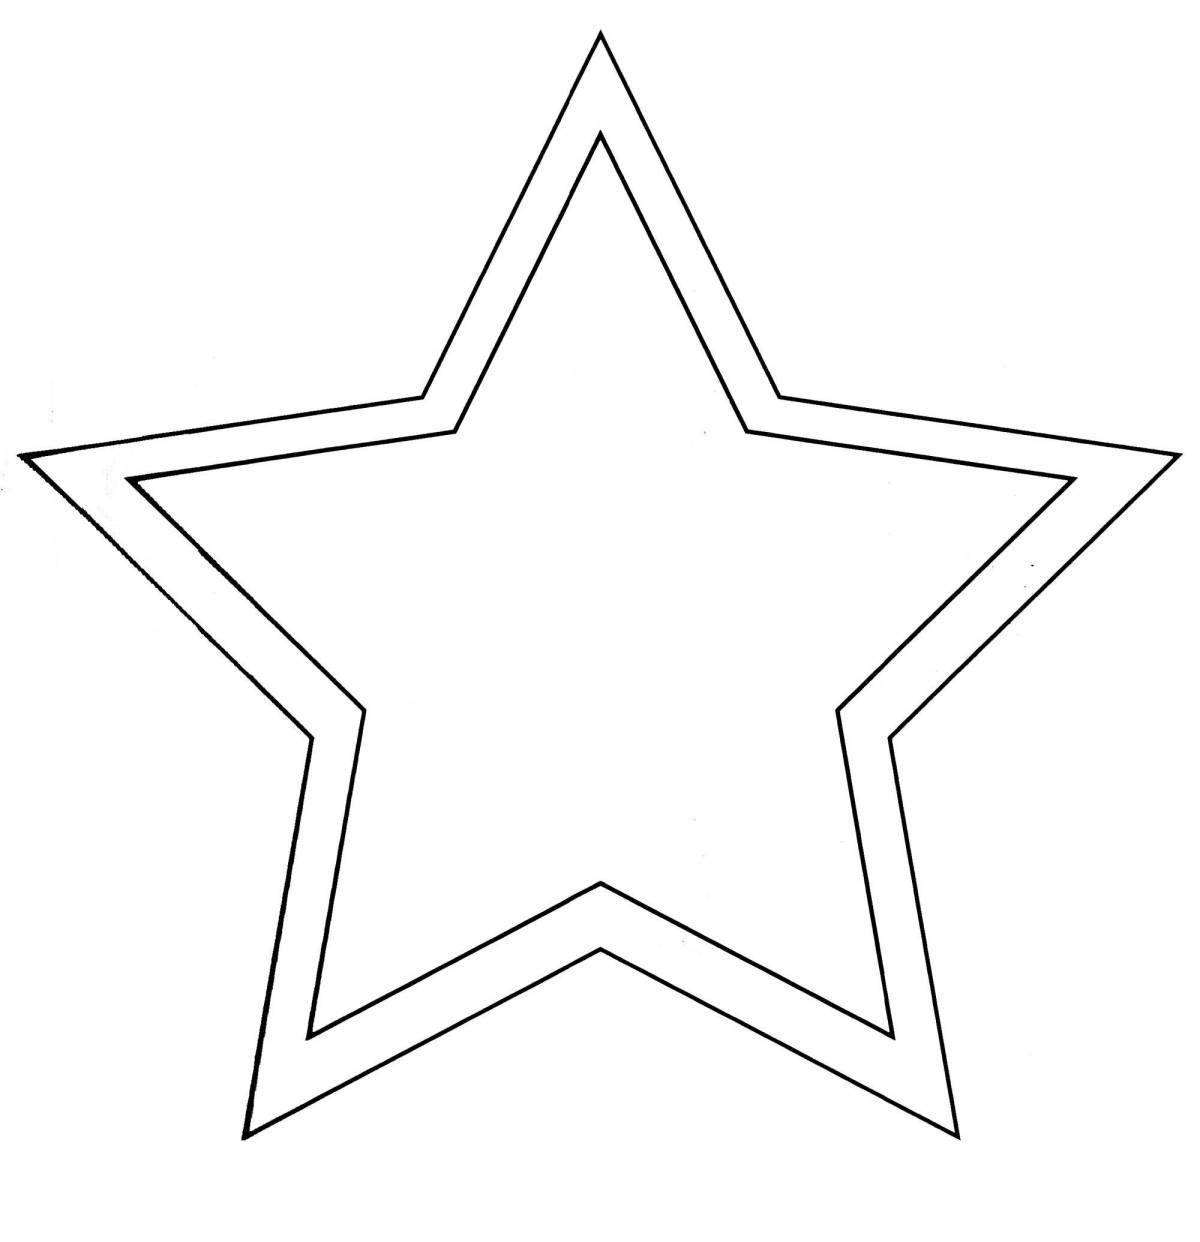 Five-pointed star #6